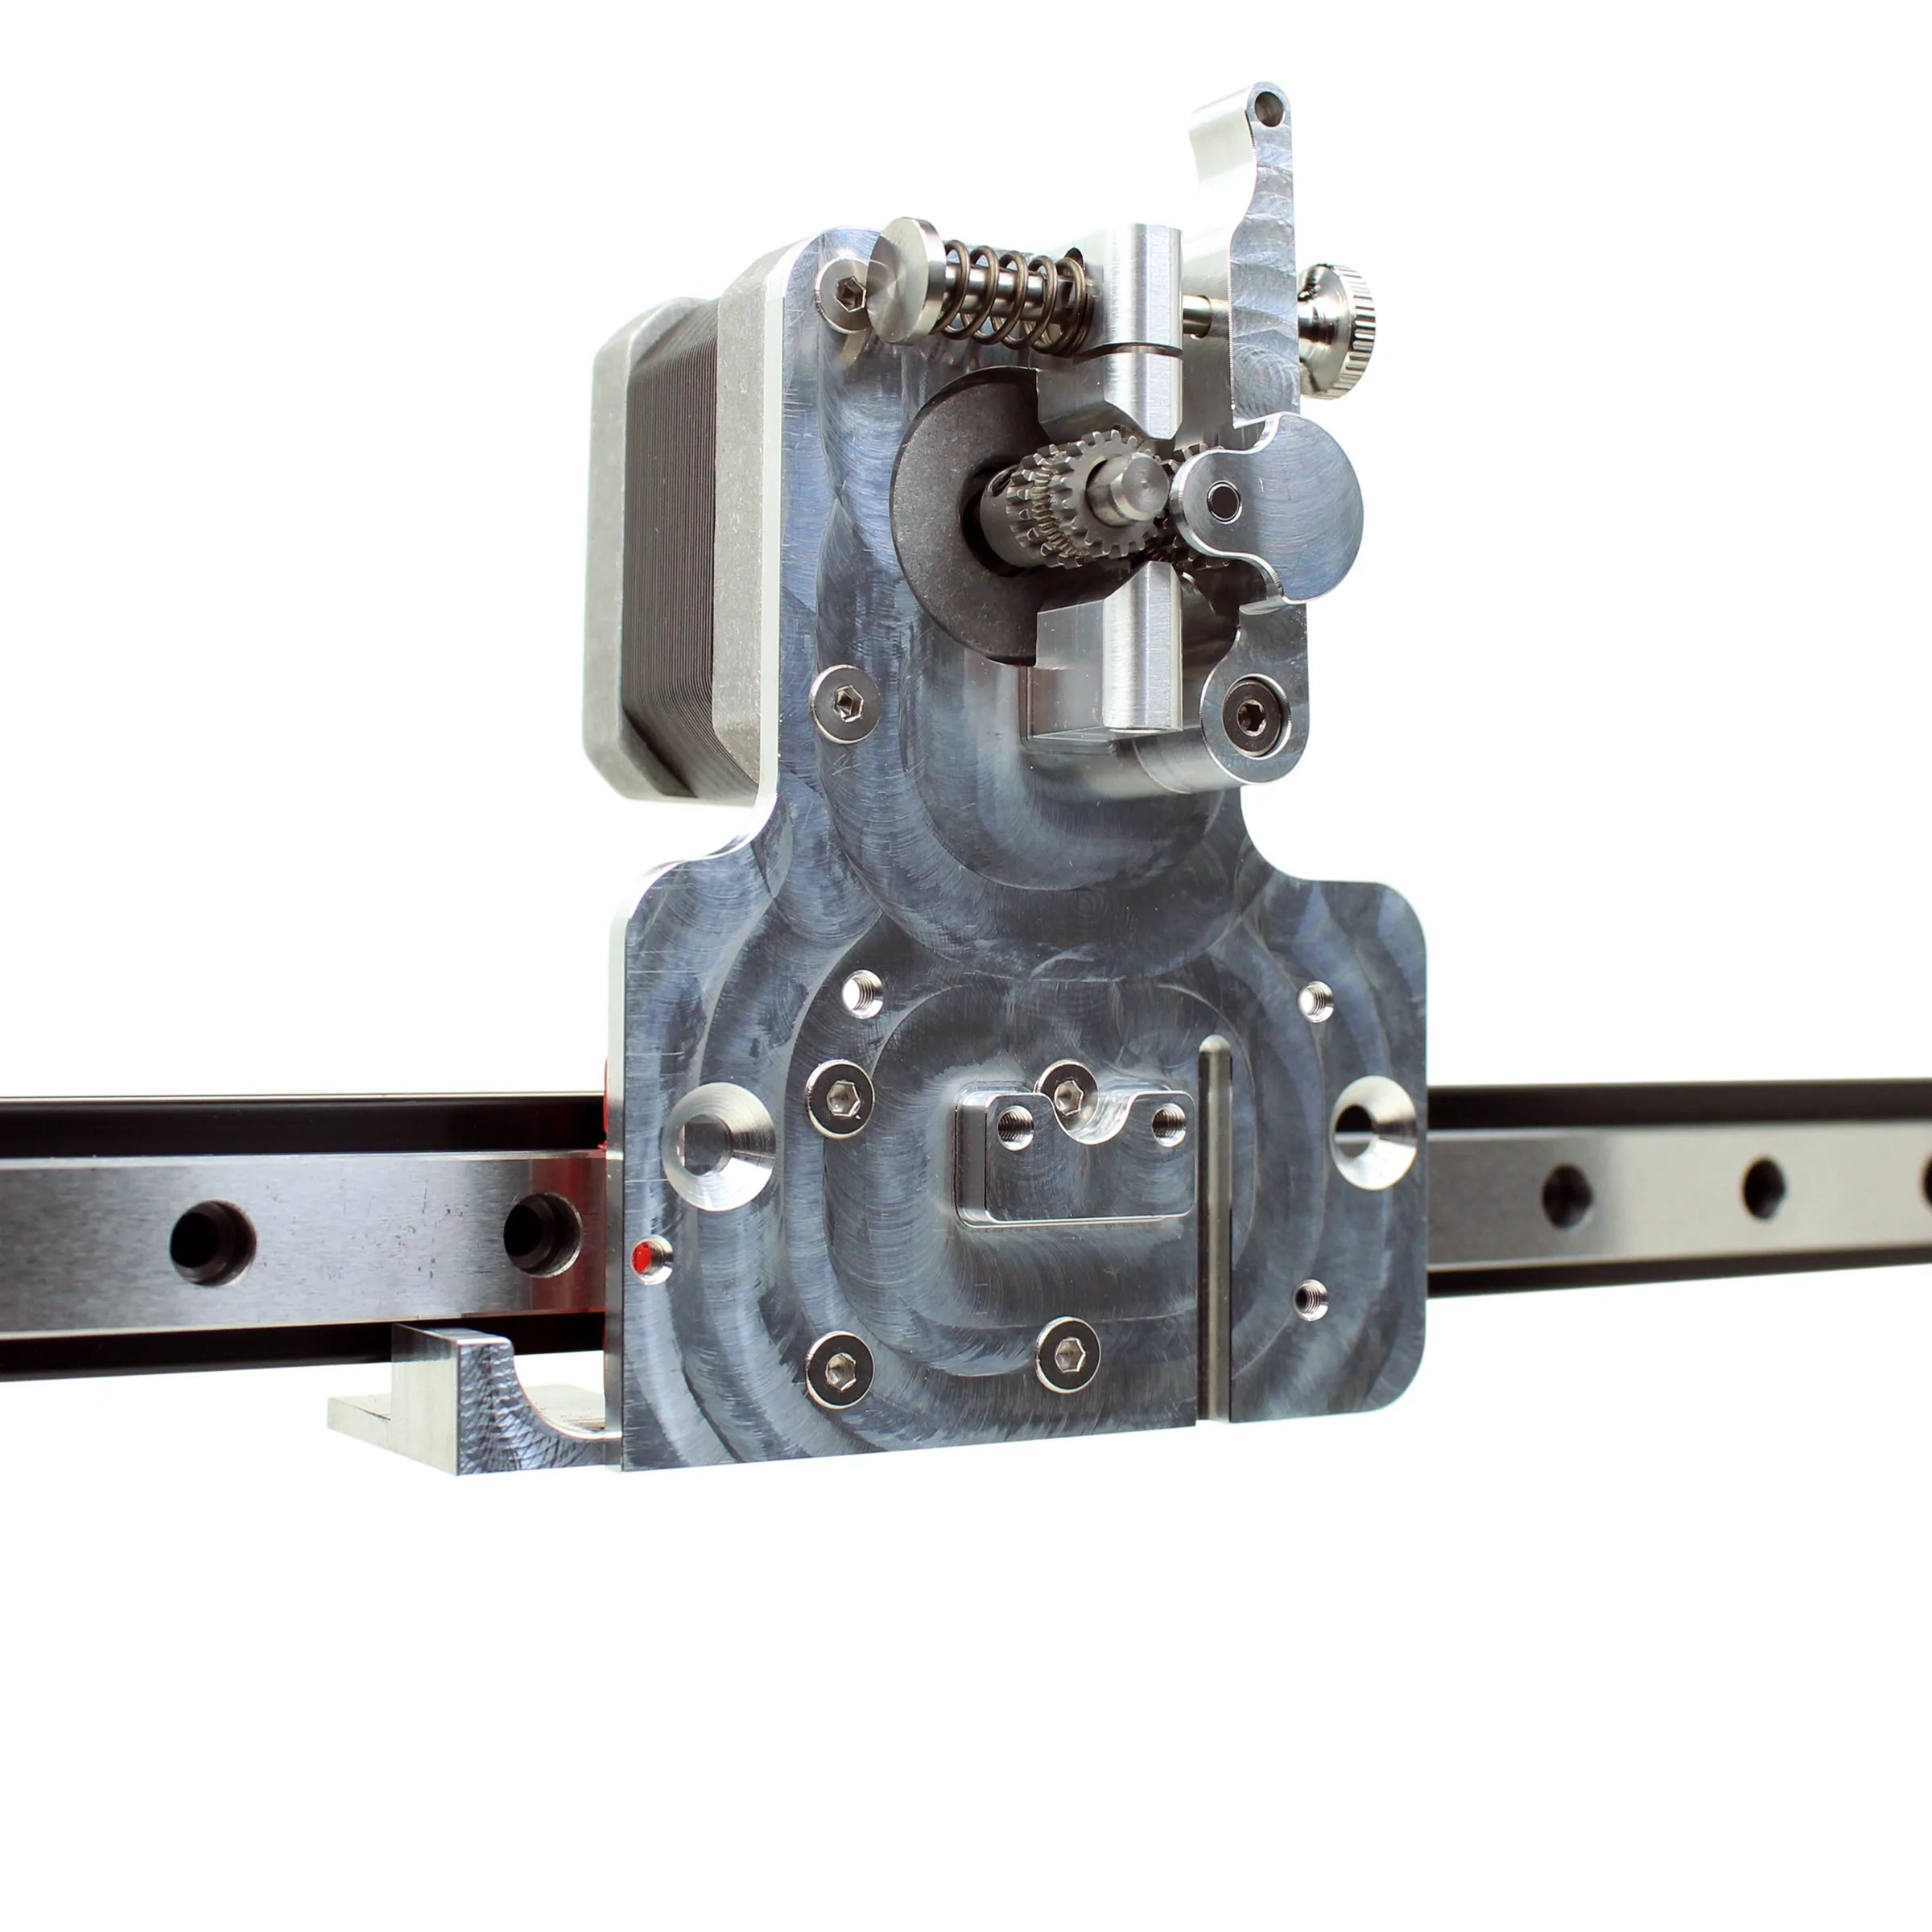 Micro Swiss Direct Drive Extruder with Hotend for Linear Rail Setup (M2605)